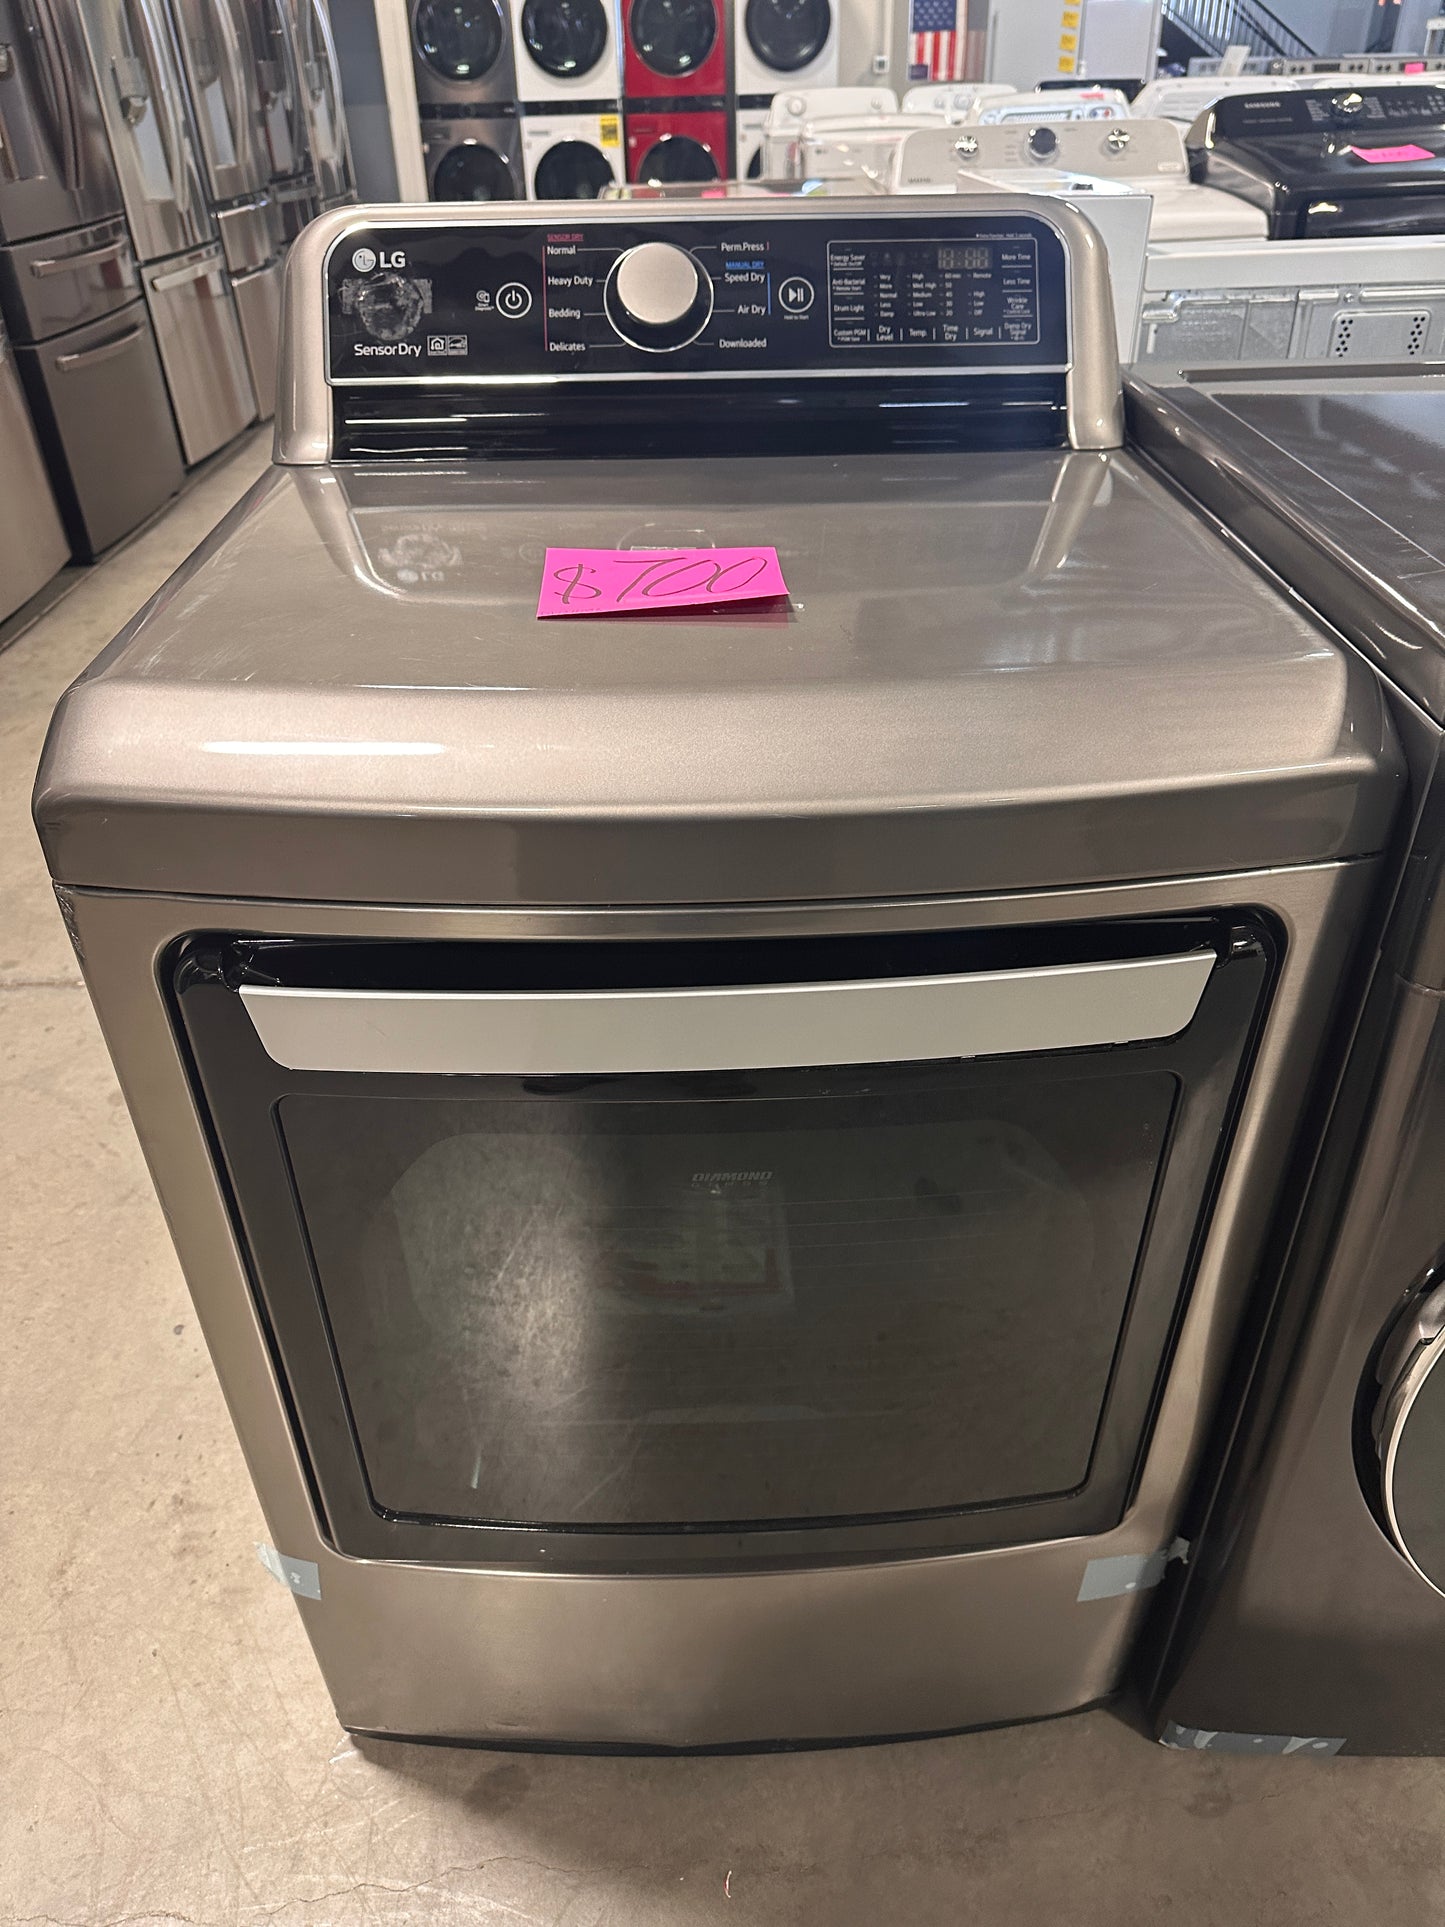 ELECTRIC LG DRYER with SENSOR DRY - DRY11783 DLE7300VE